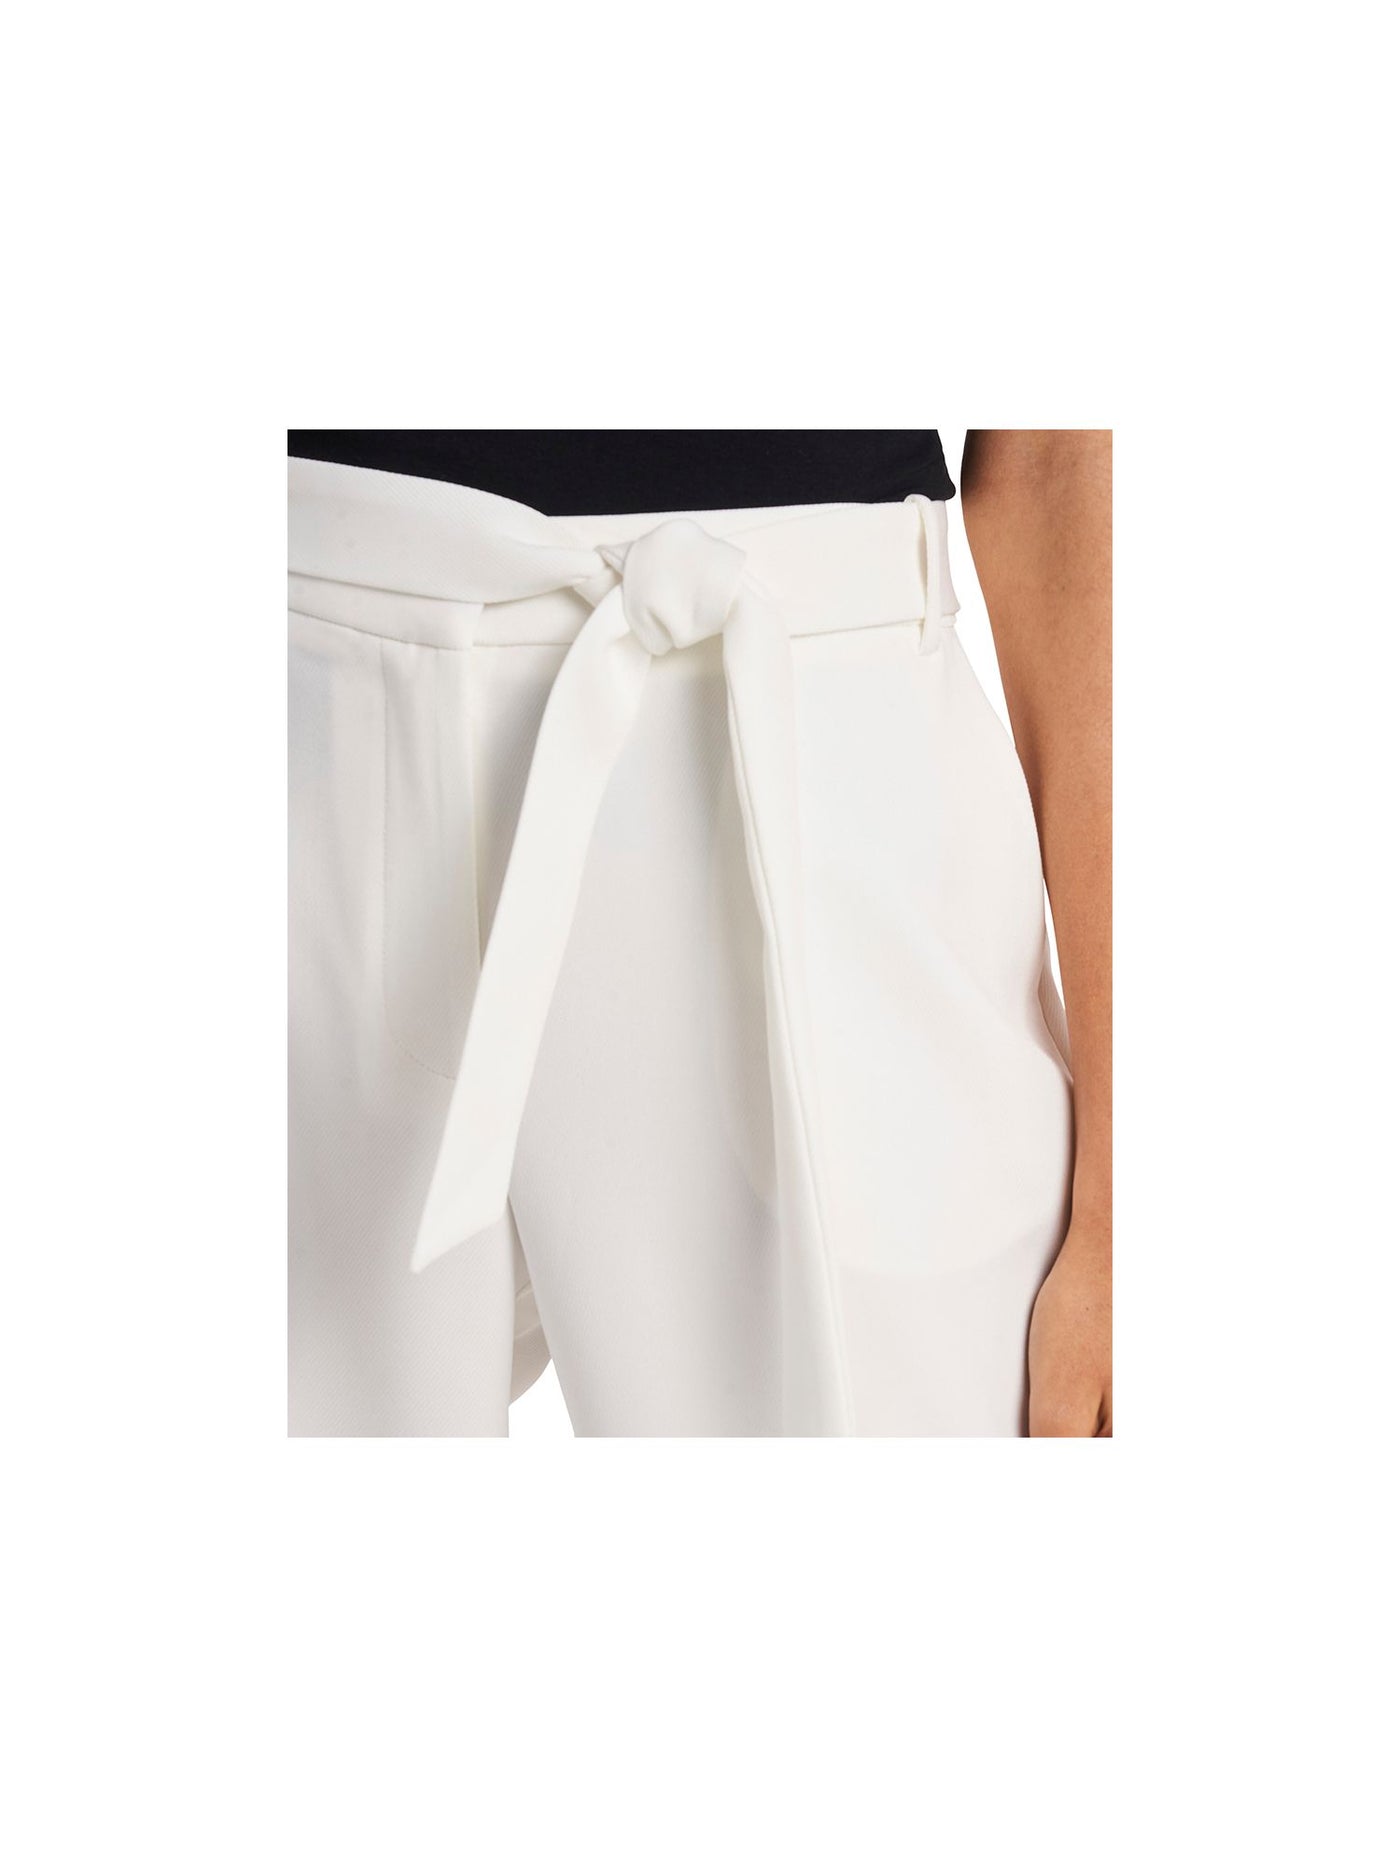 RILEY&RAE Womens White Stretch Zippered Pocketed Belted Wear To Work Cuffed Pants 2